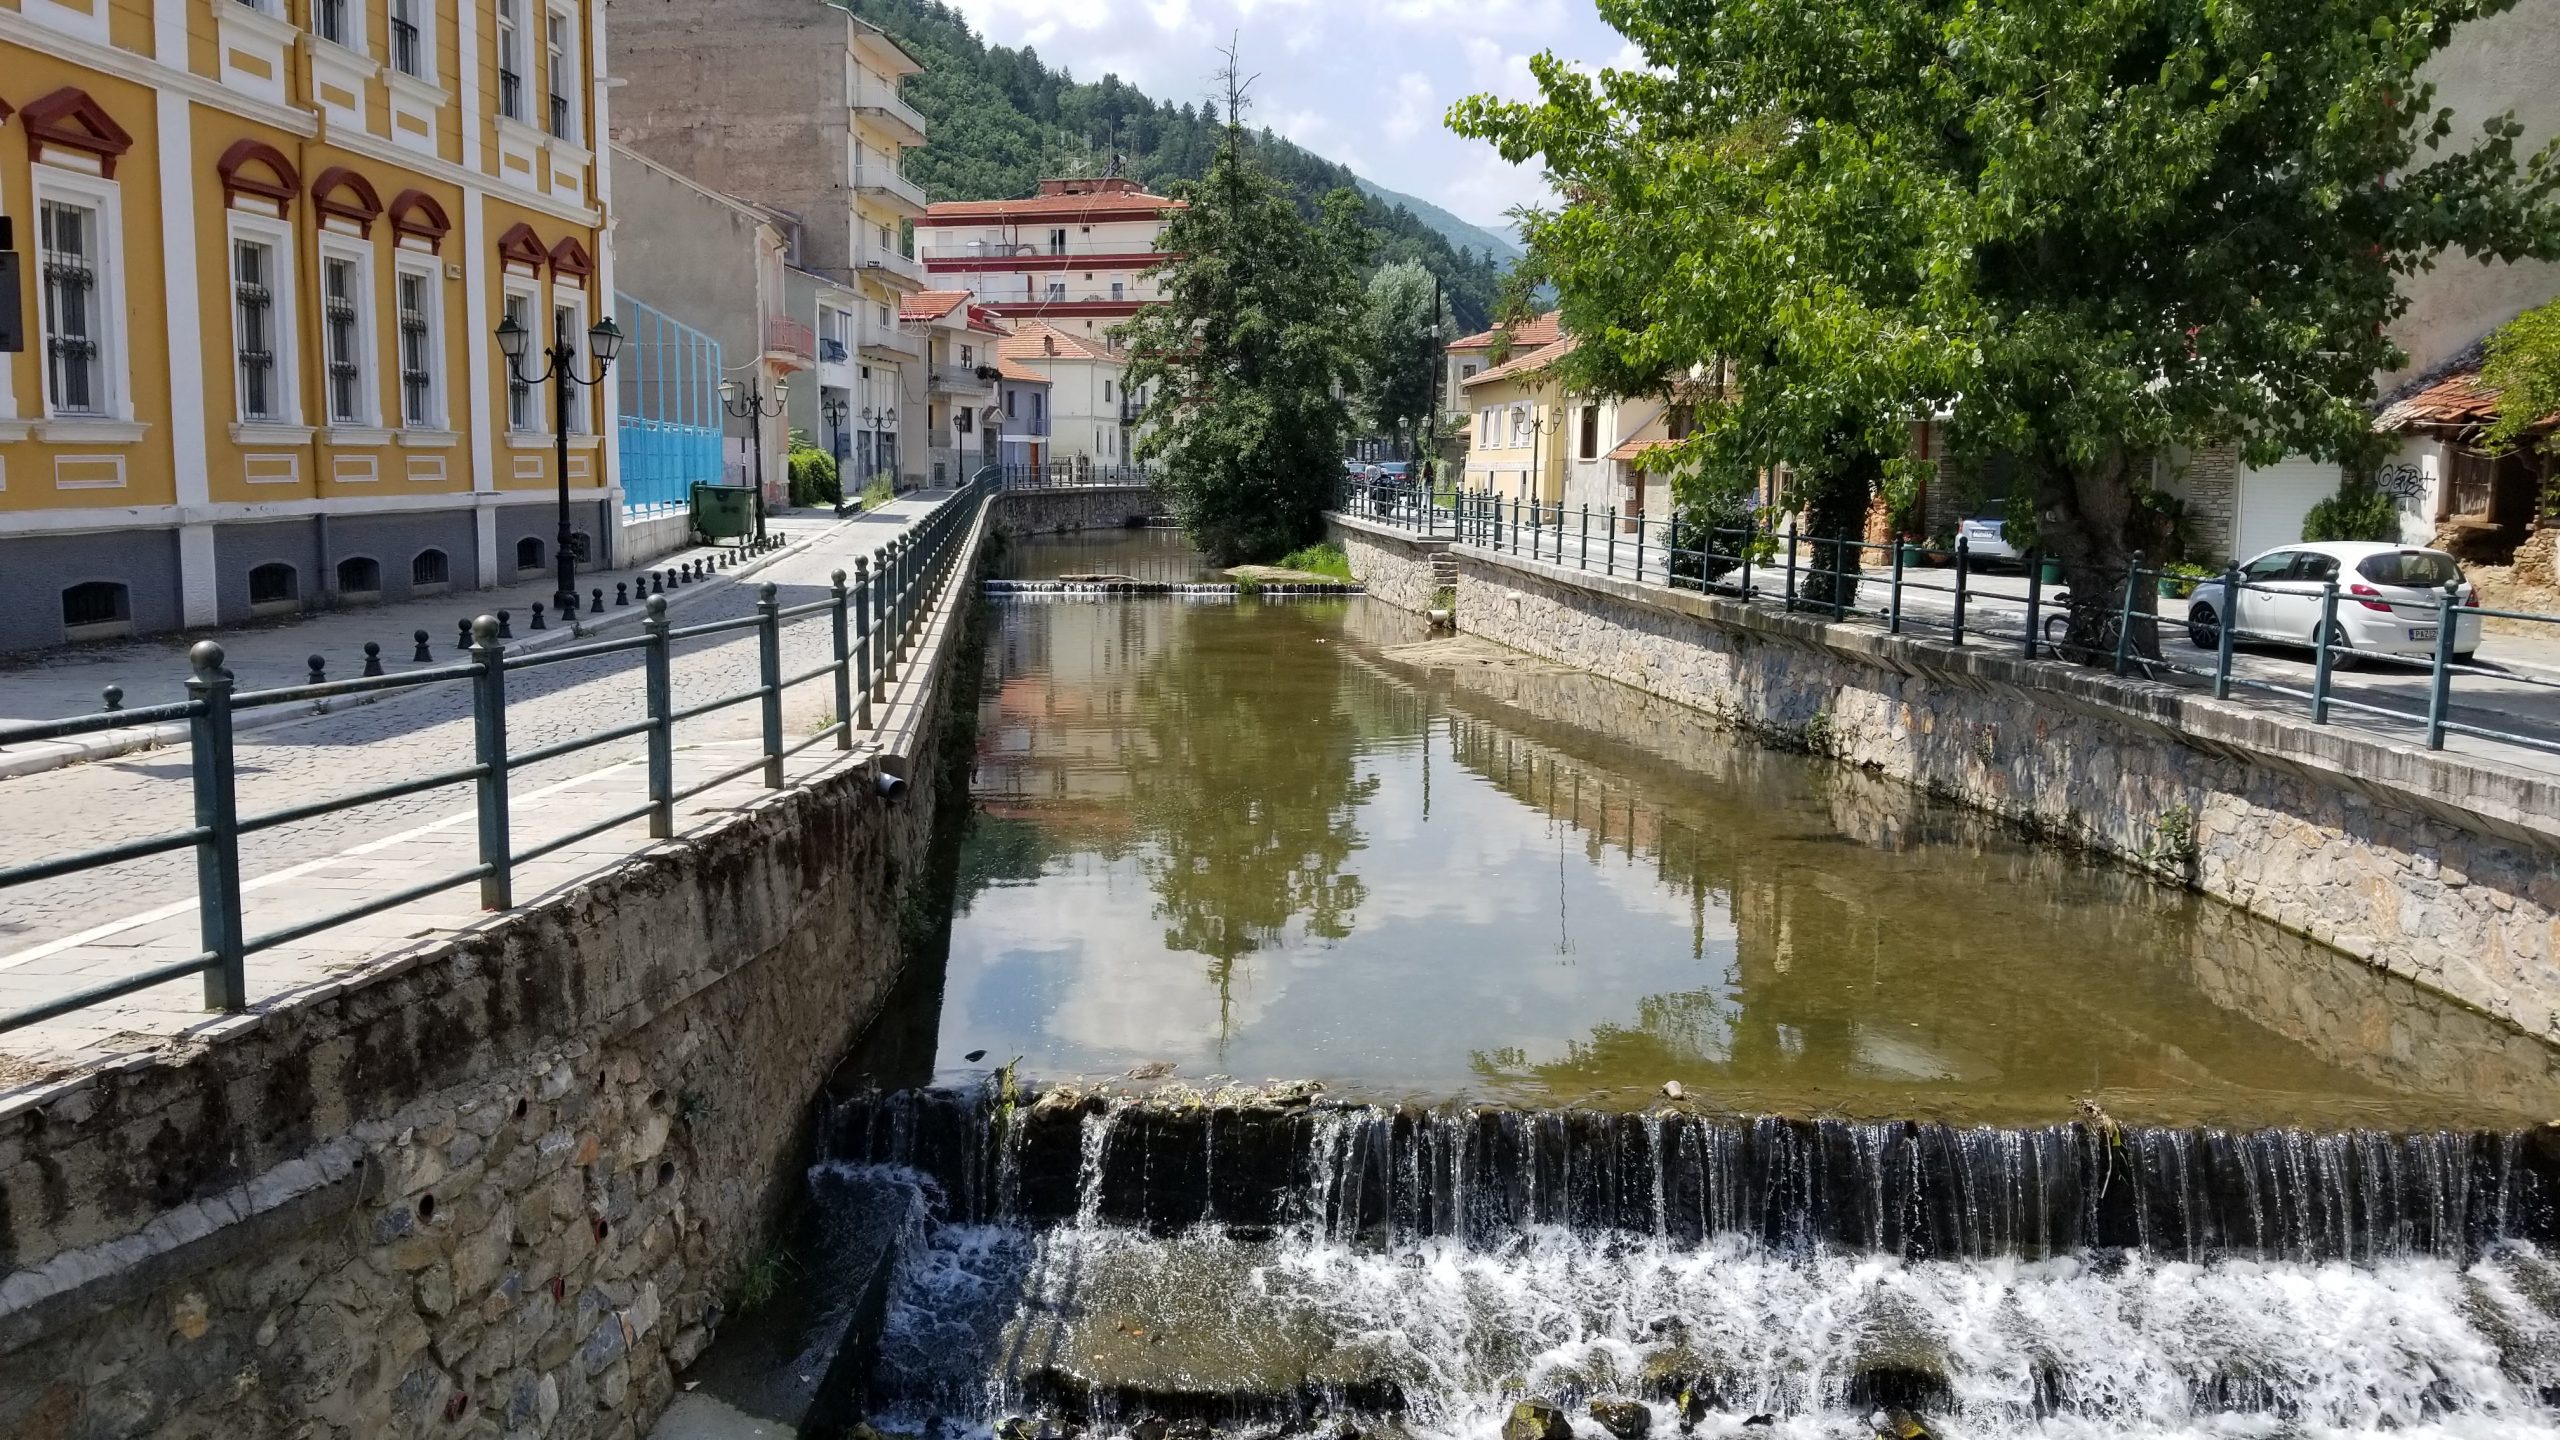 Returning to where it all began…The city of Florina, and the village of Ethniko